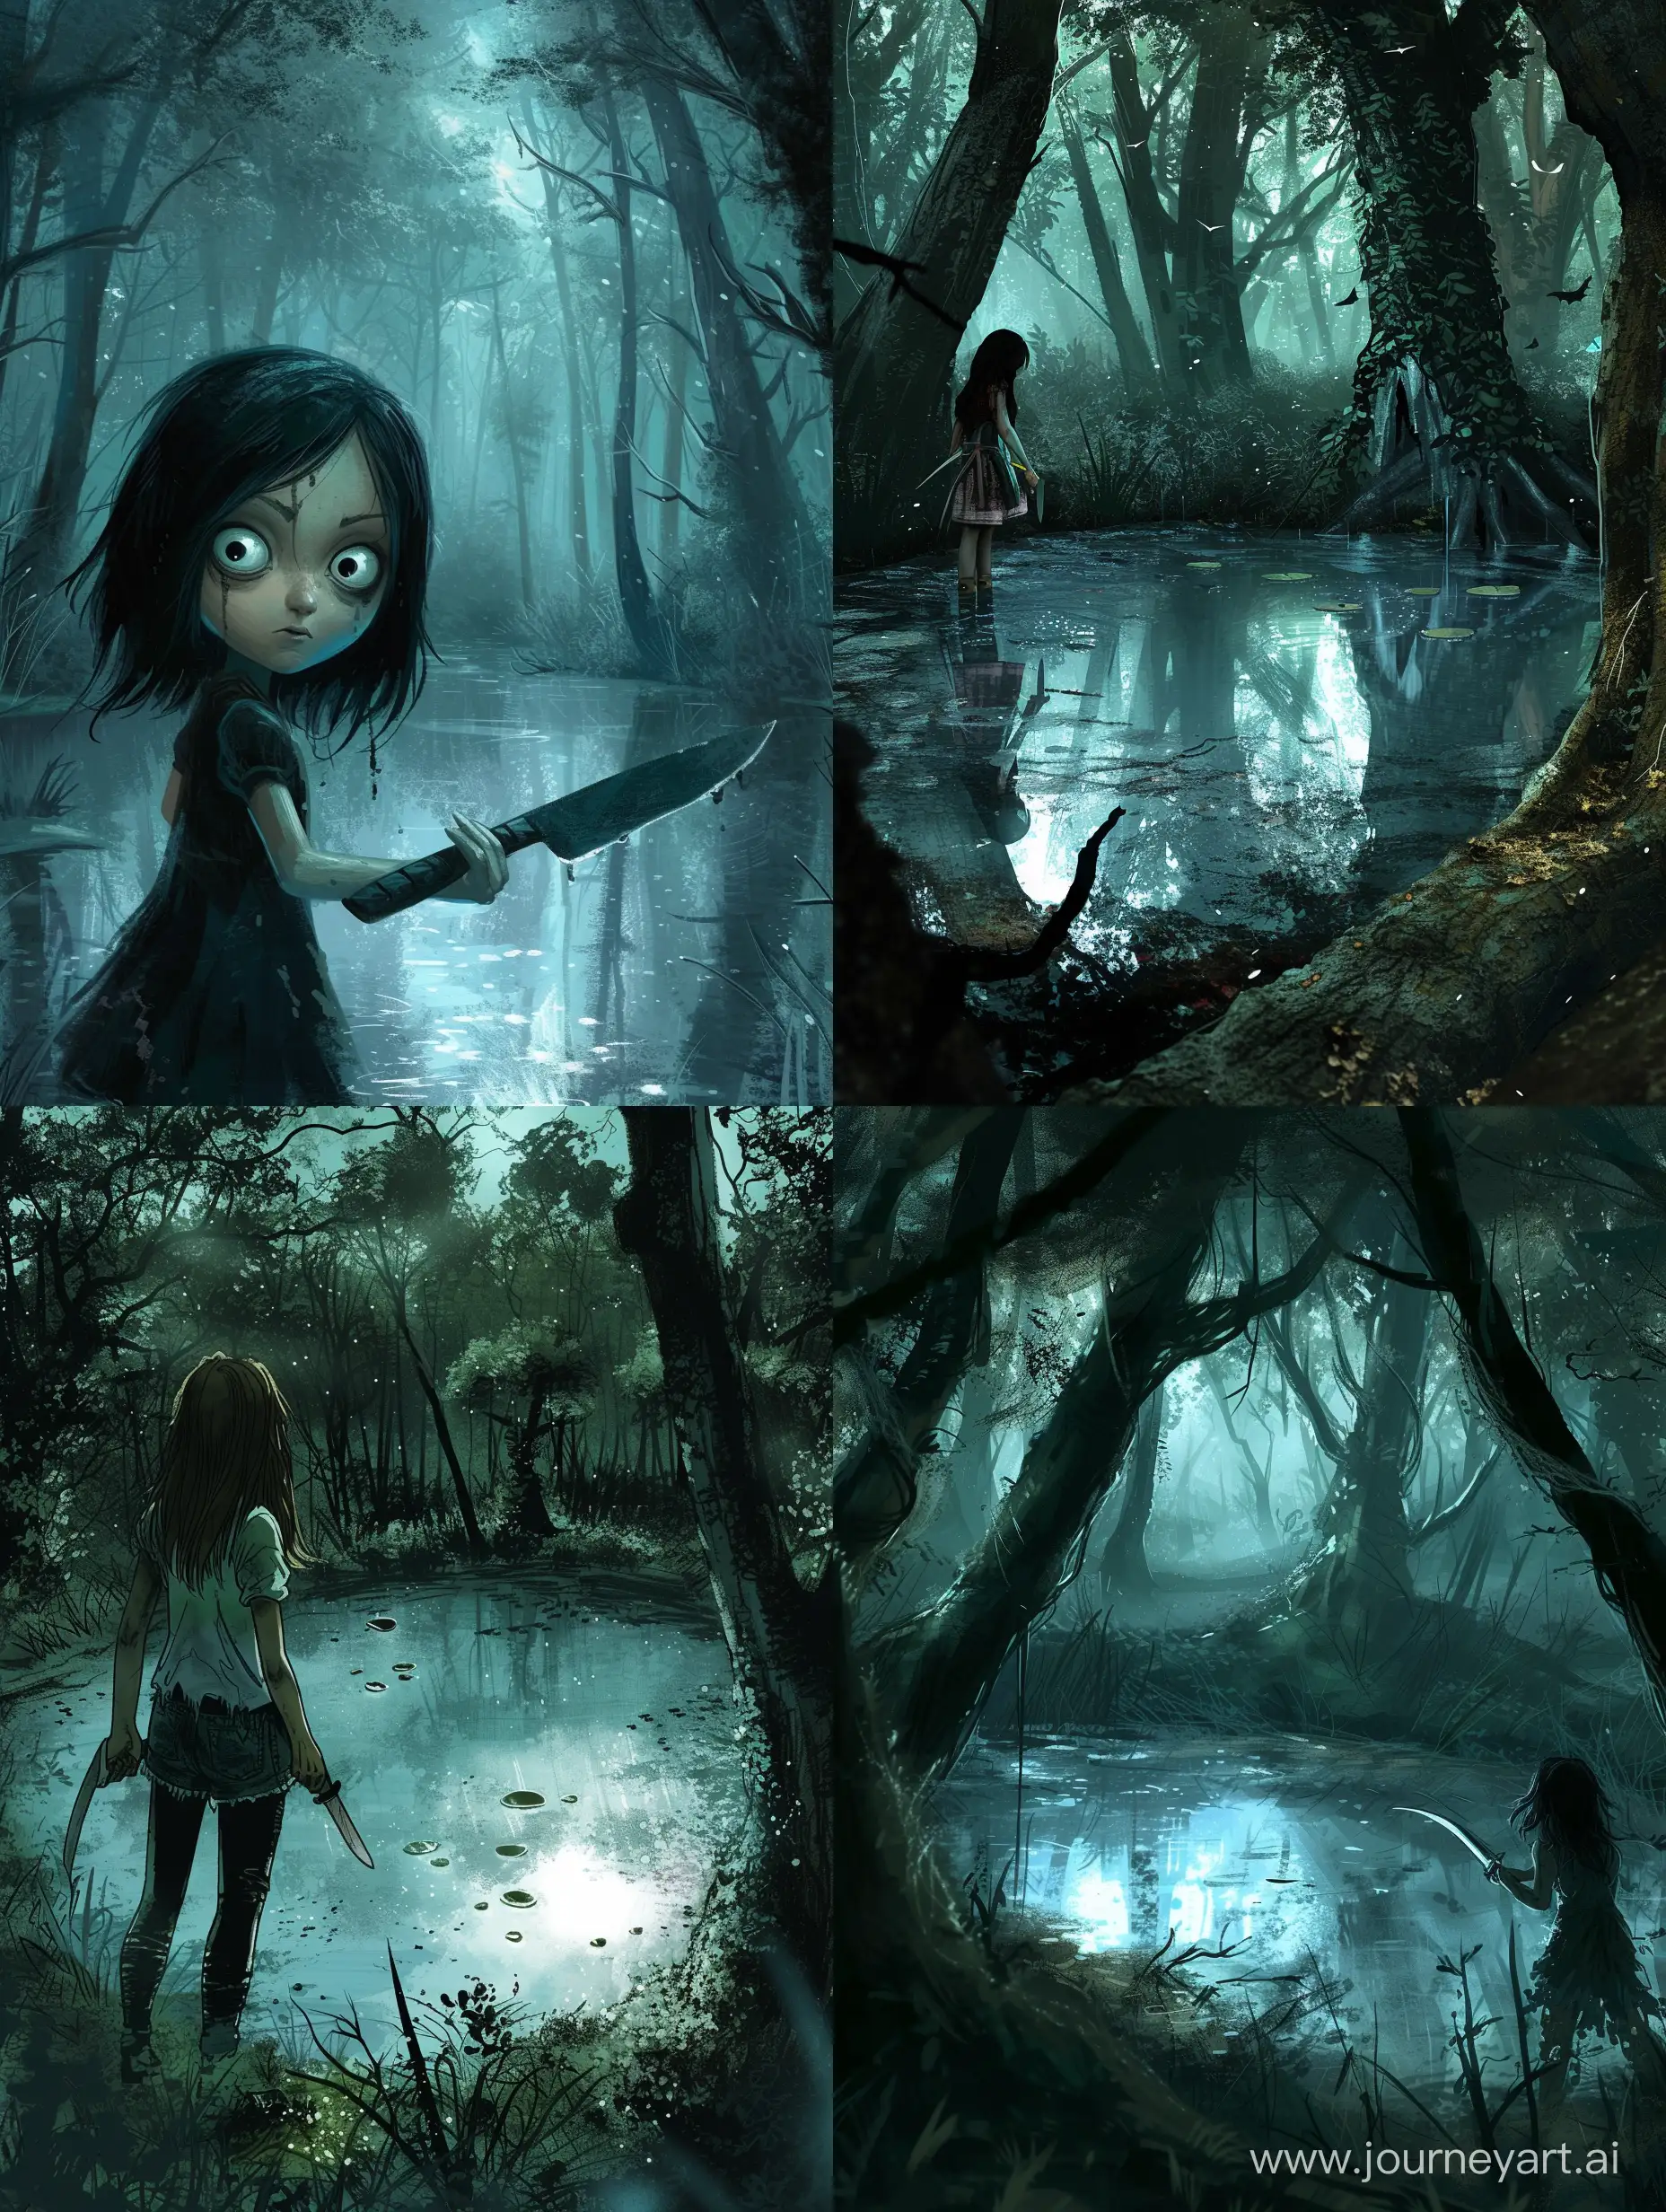 Mysterious-Forest-Scene-Enigmatic-Silver-Lake-and-a-Girl-with-a-Knife